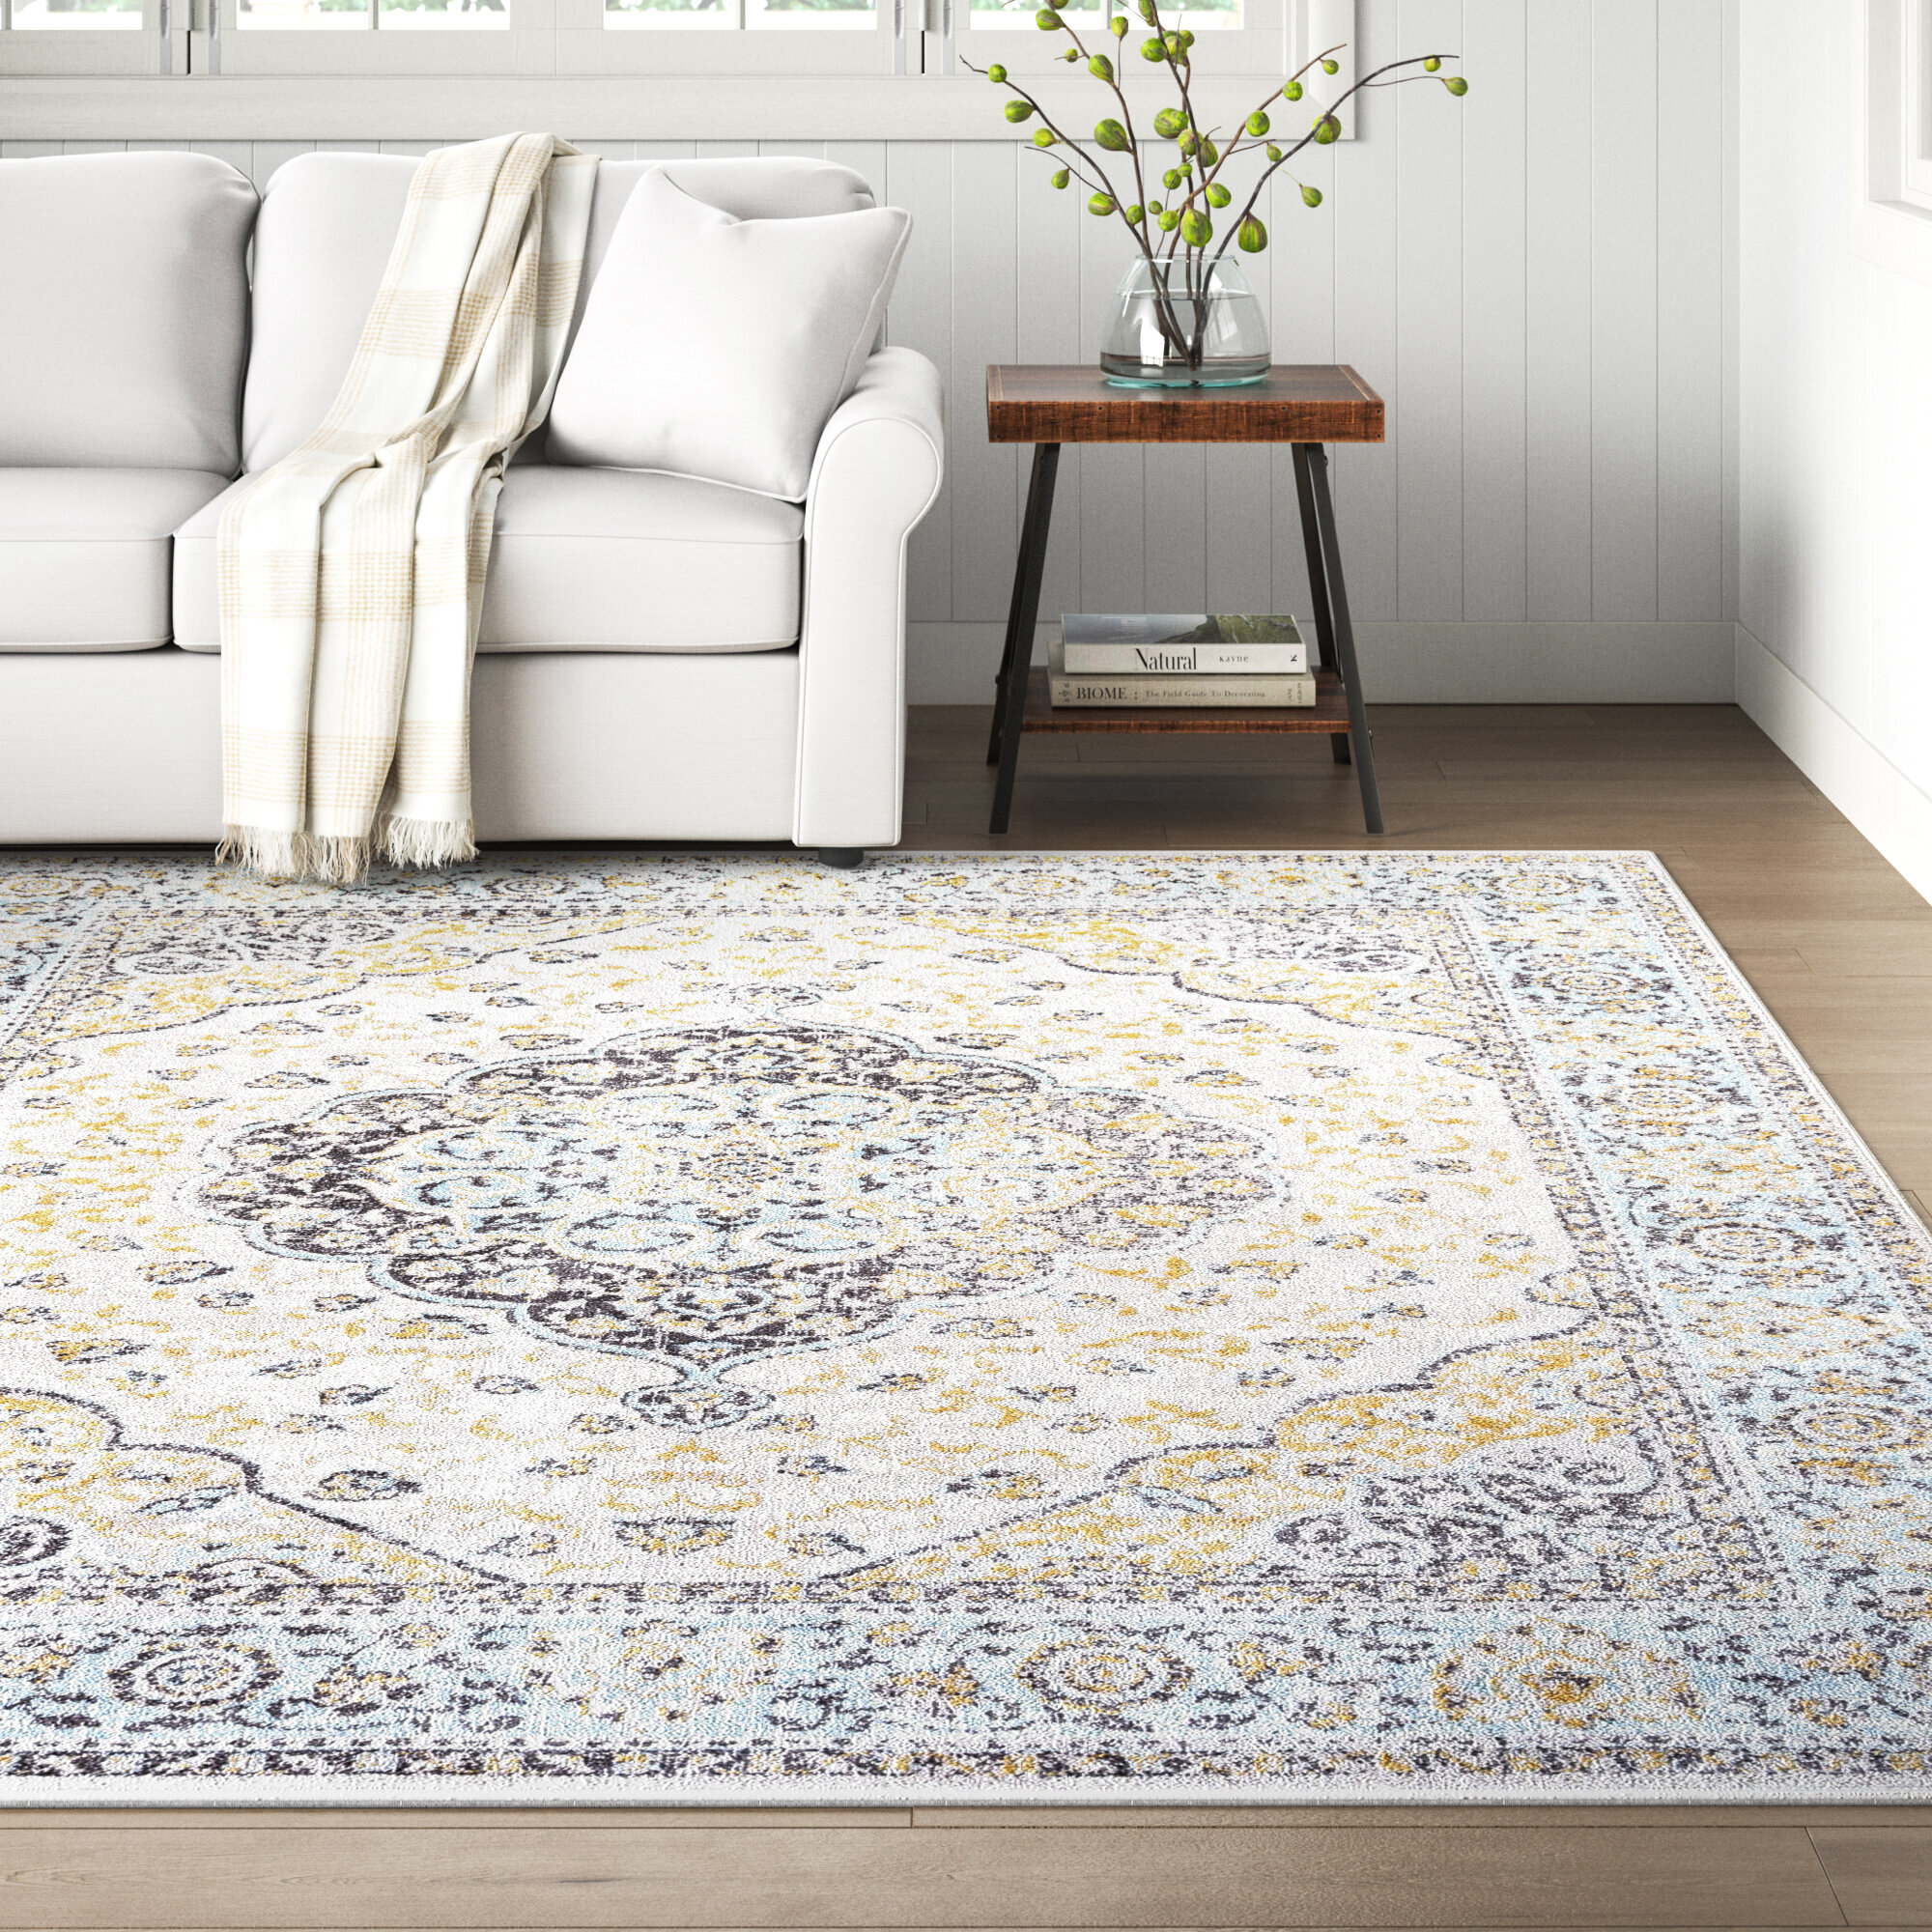 Traditional Flowerey Style Living Area Rugs Oriental Design Carpet Runners Mat